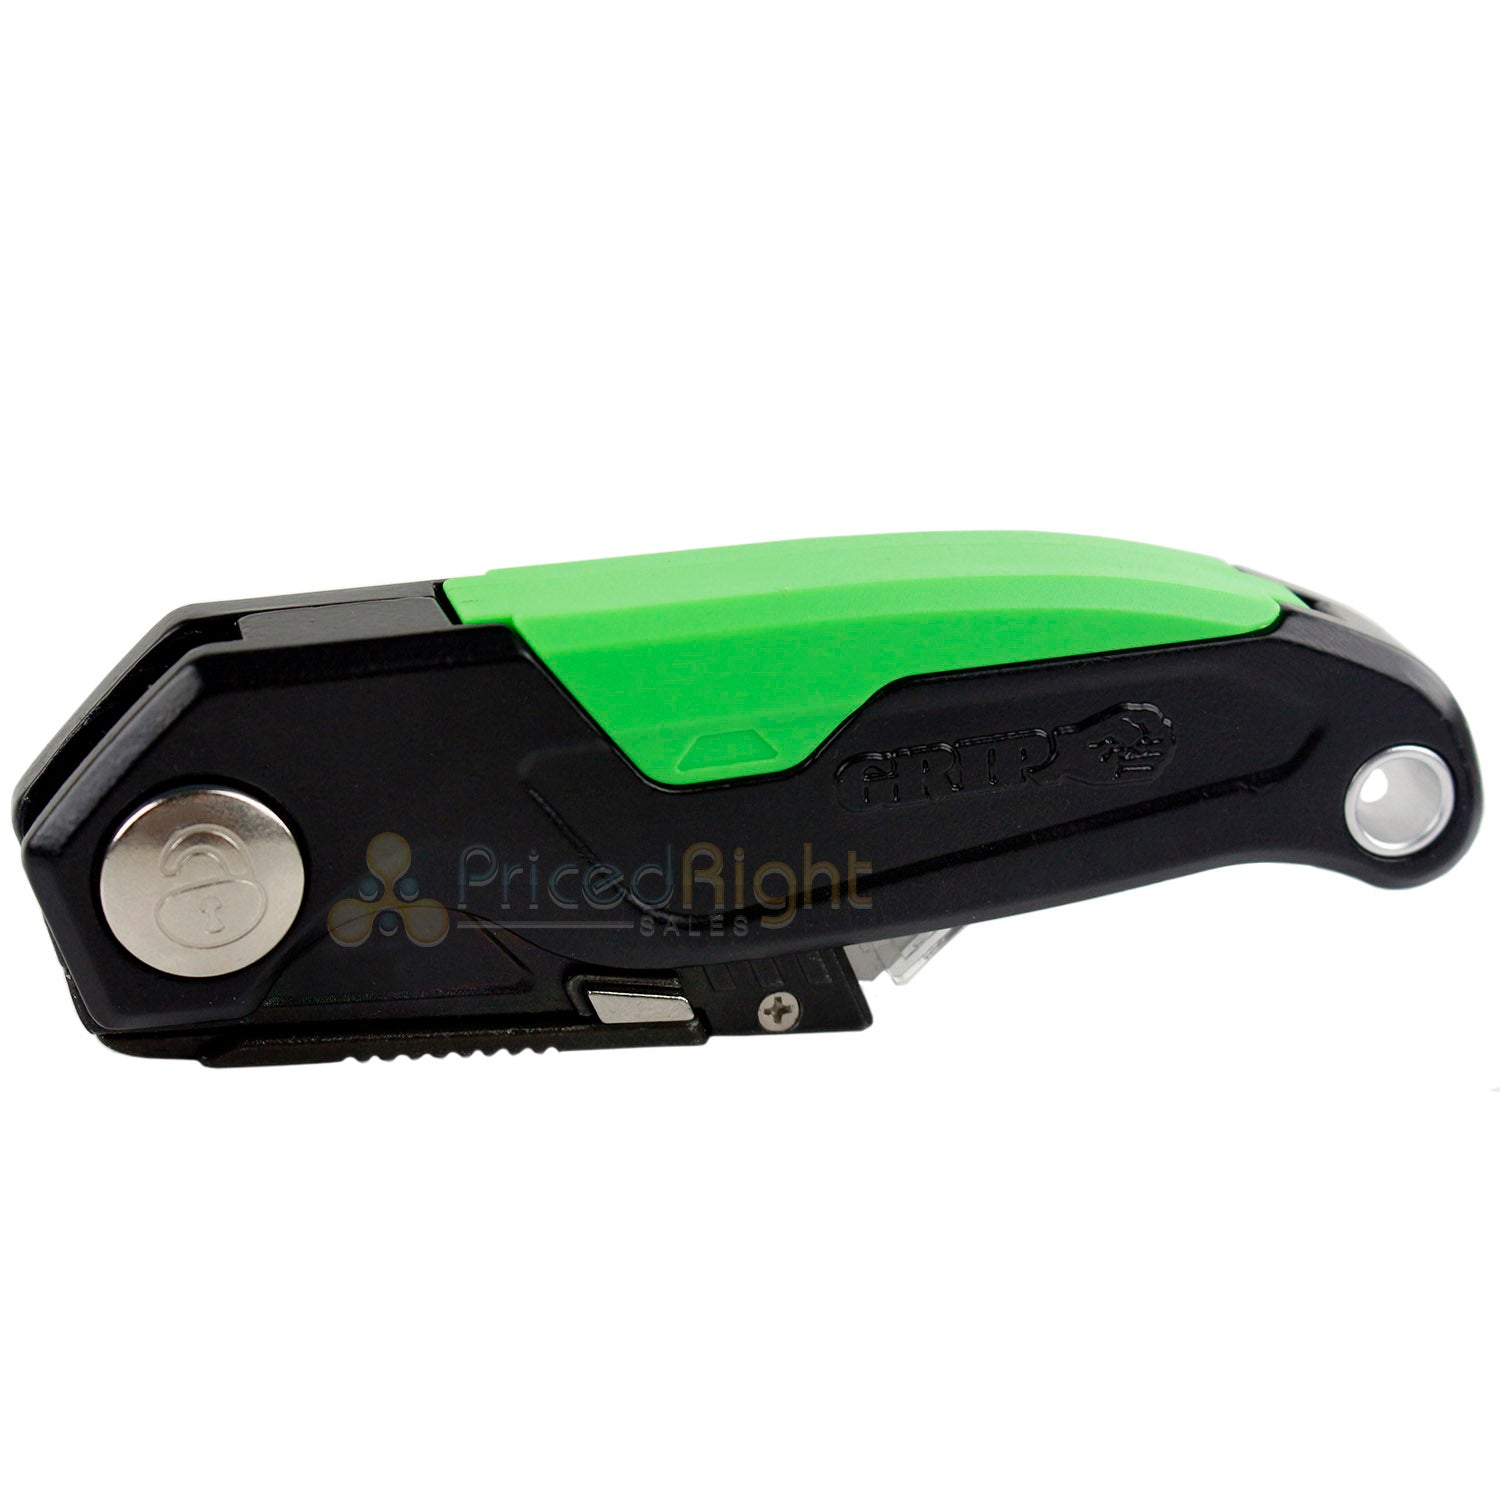 Quick Release Folding Retractable Utility Knife With Extra Razor Blade Storage